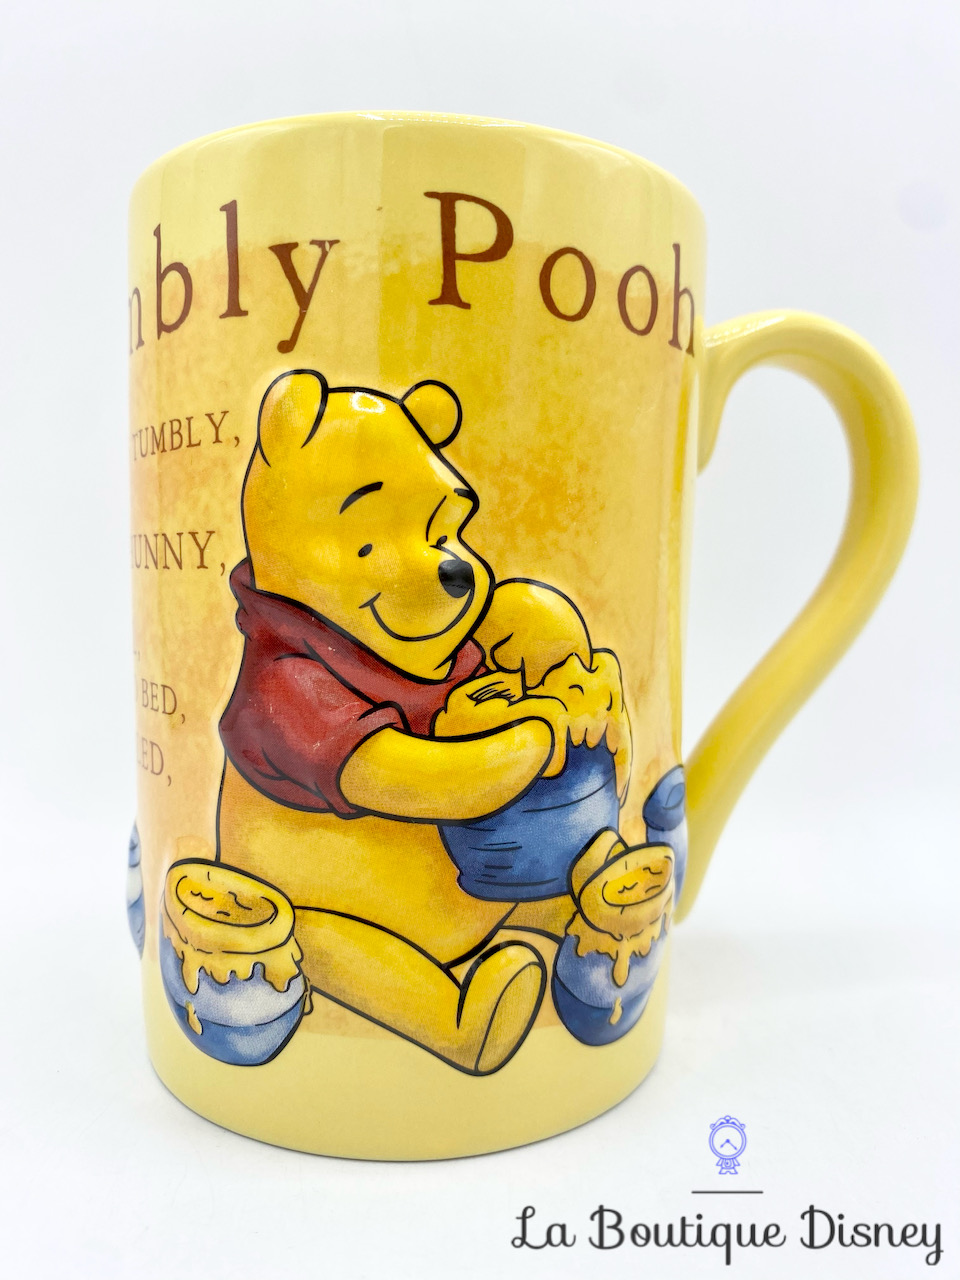 Tasse Winnie l\'ourson Rumbly Tumbly Pooh Disney Store Exclusive mug jaune relief 3D